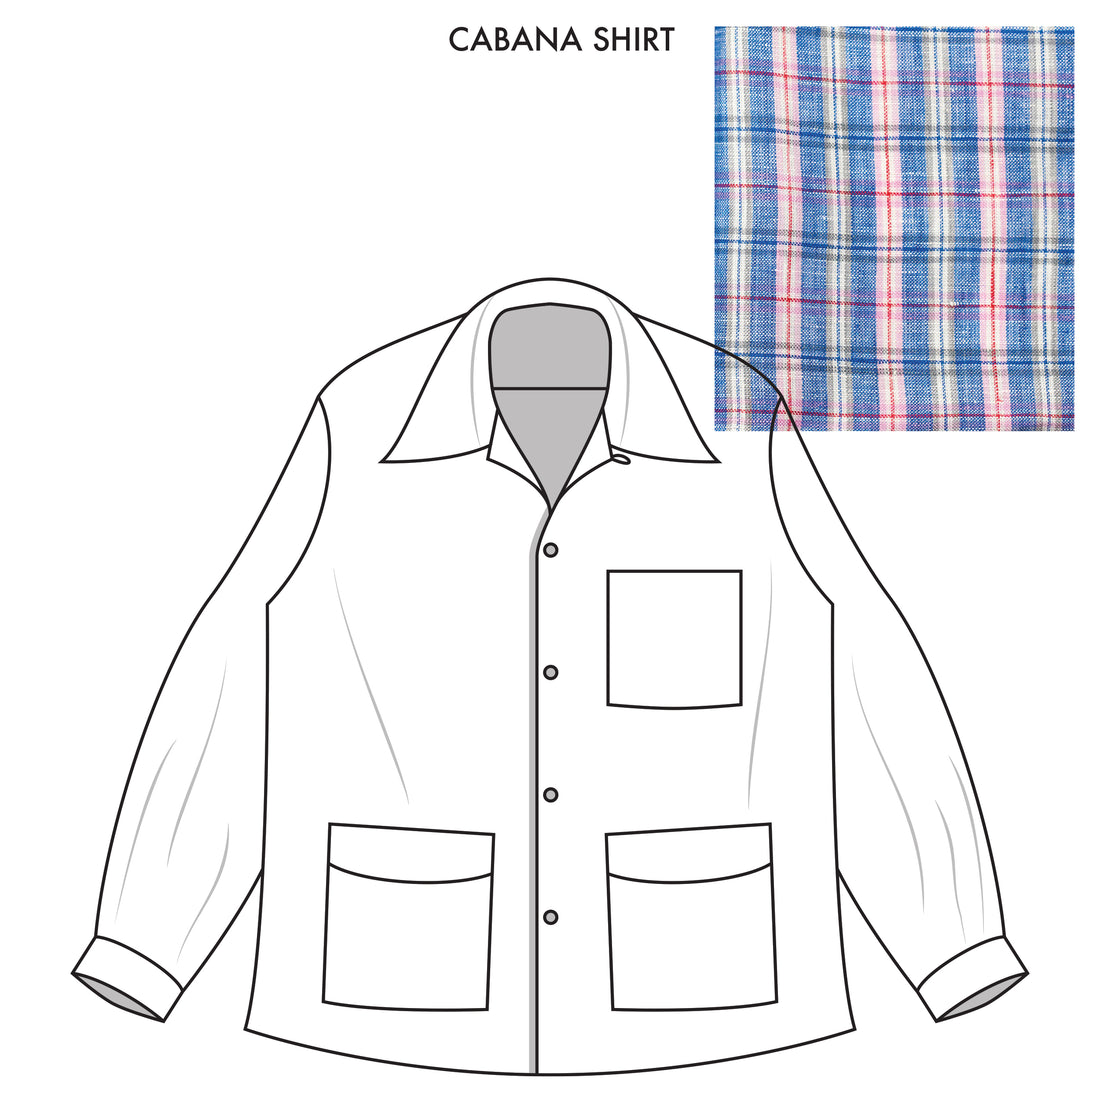 Bryceland's Cabana Shirt Made-to-Order Blue/Red